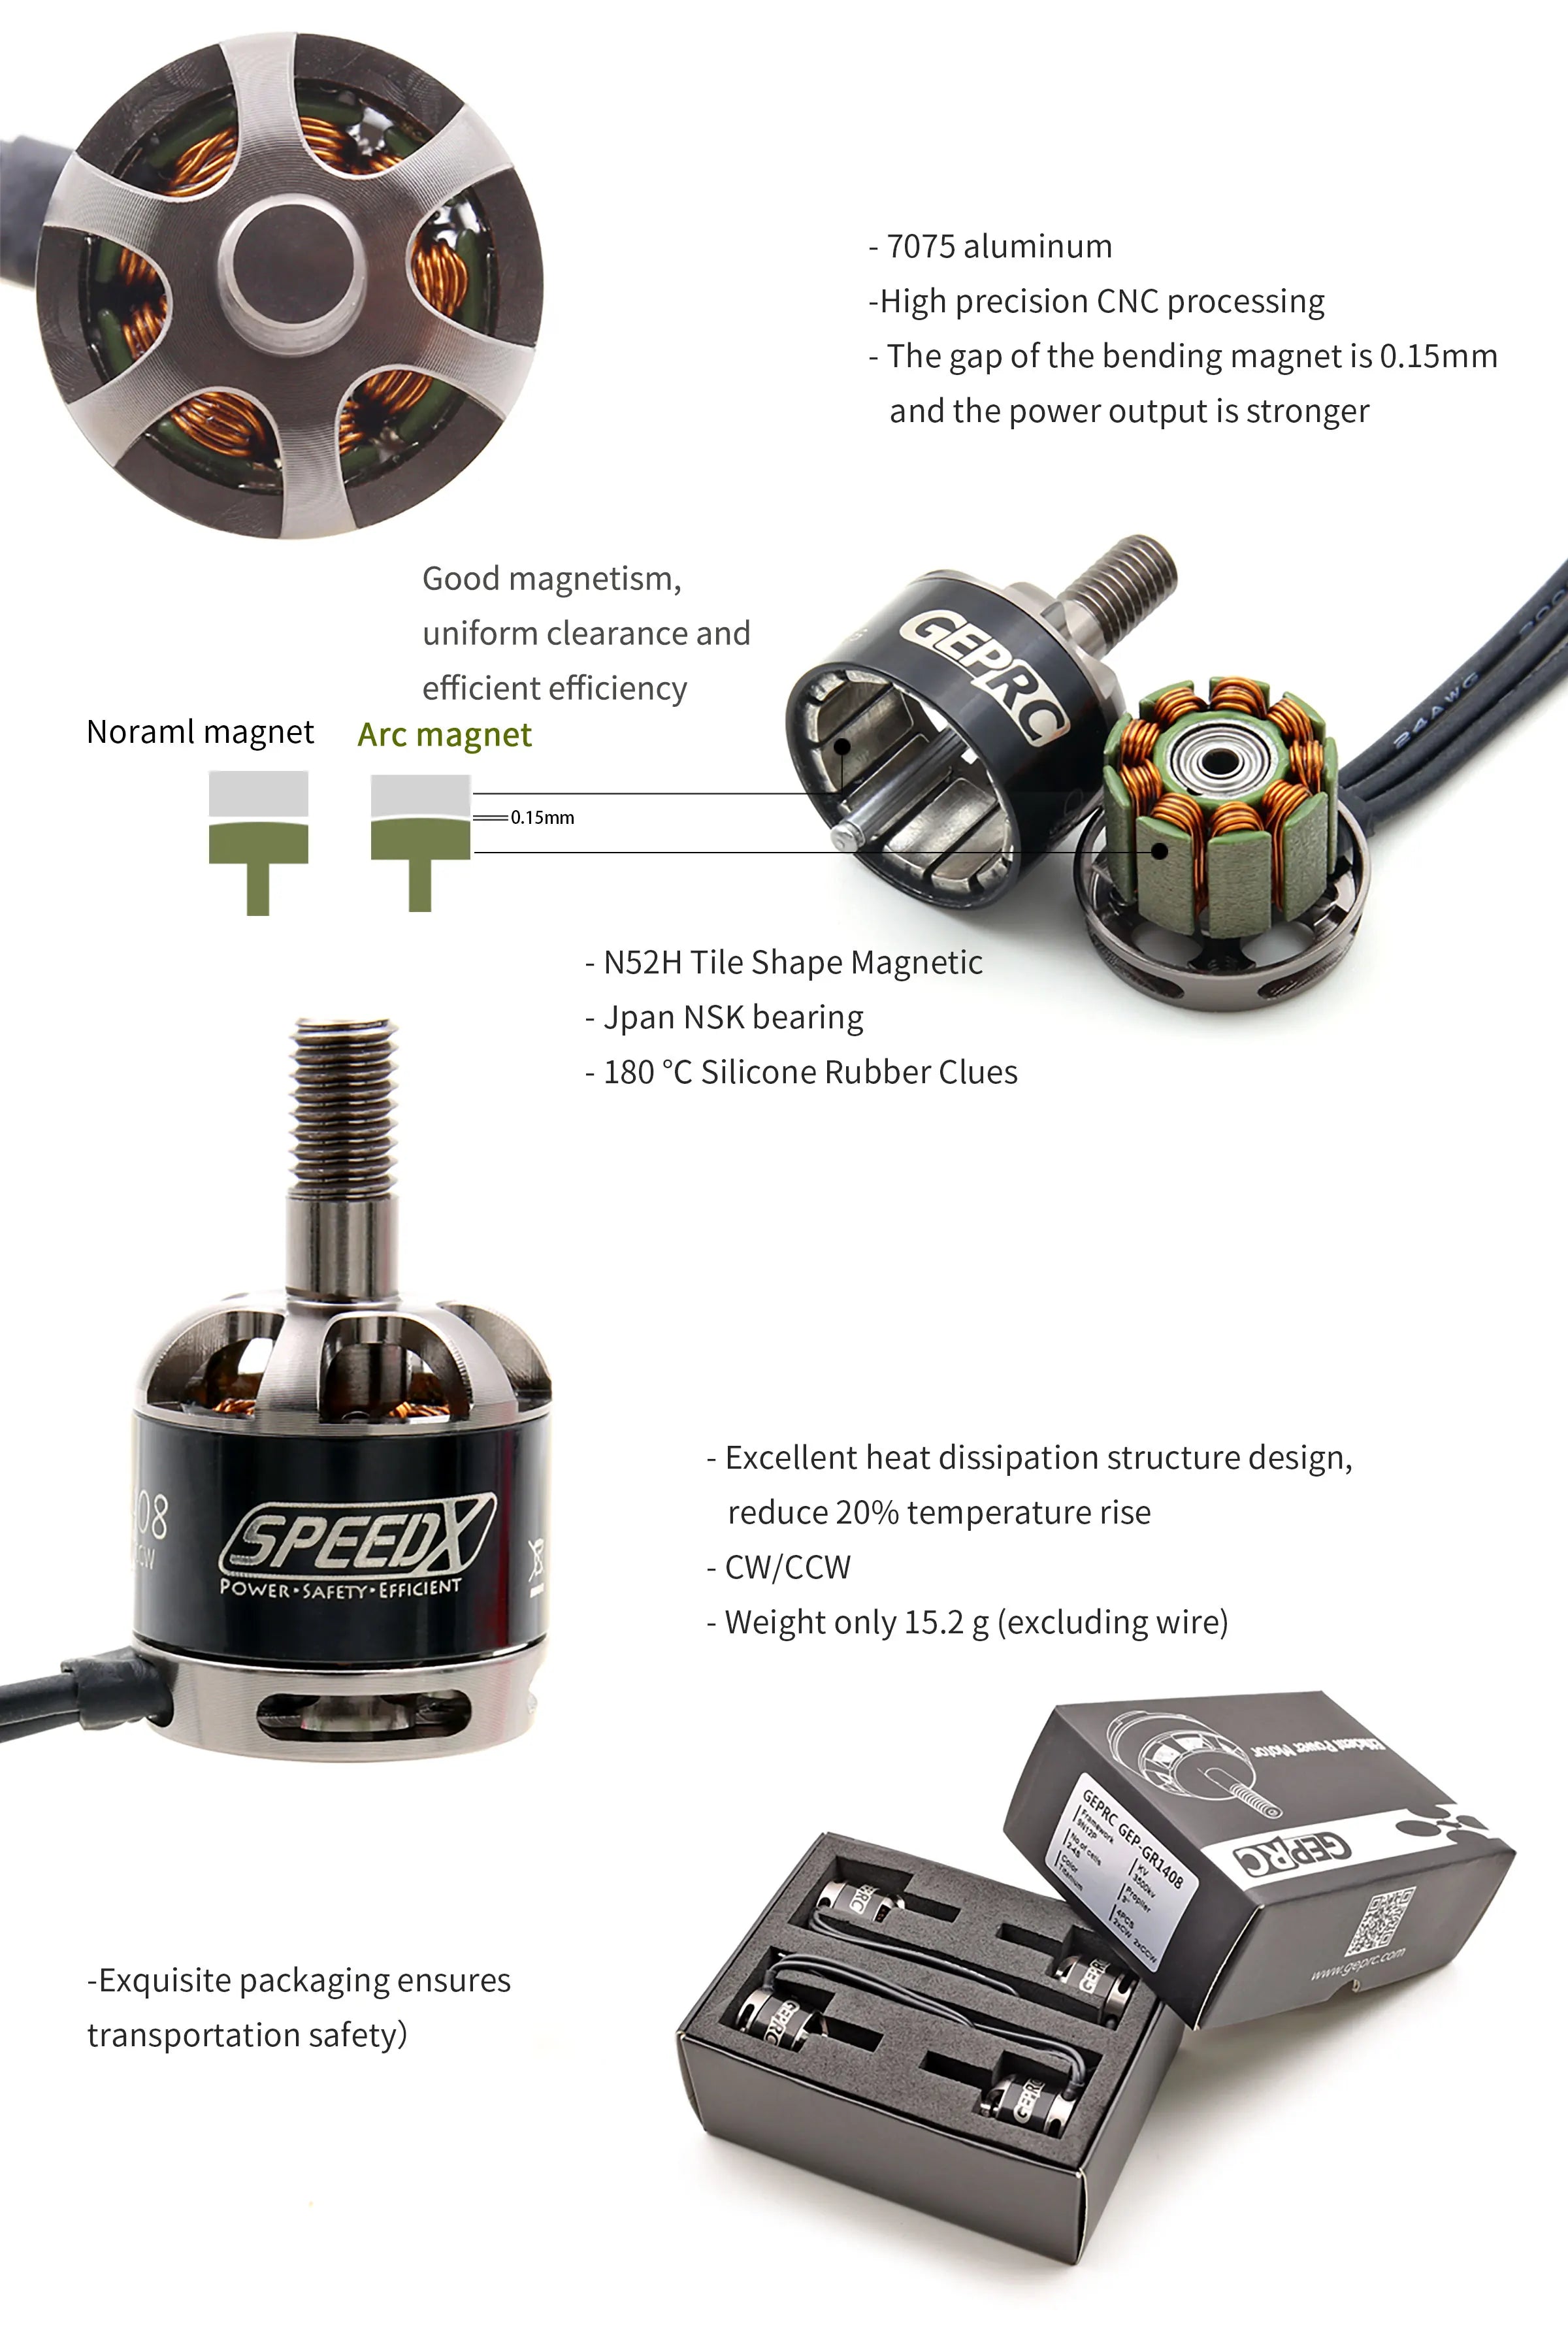 GEPRC GR1408 3500KV Motor, gap of bending magnet is 0.15mm and power output is stronger . noraml